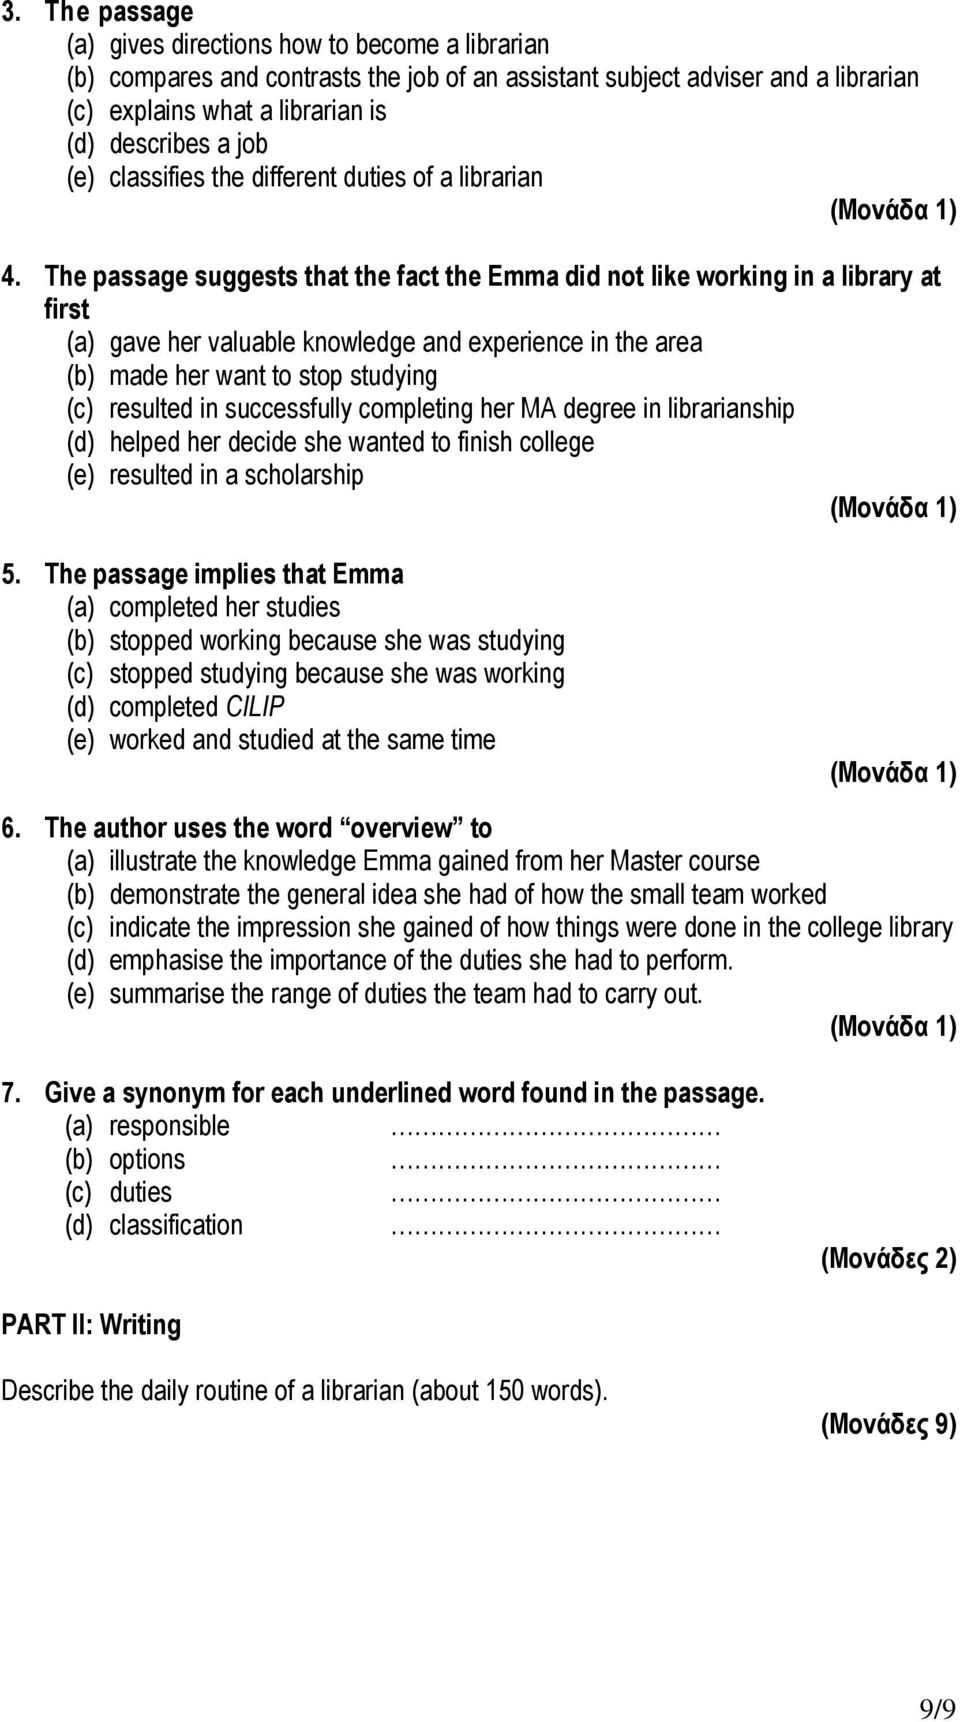 The passage suggests that the fact the Emma did not like working in a library at first (a) gave her valuable knowledge and experience in the area (b) made her want to stop studying (c) resulted in